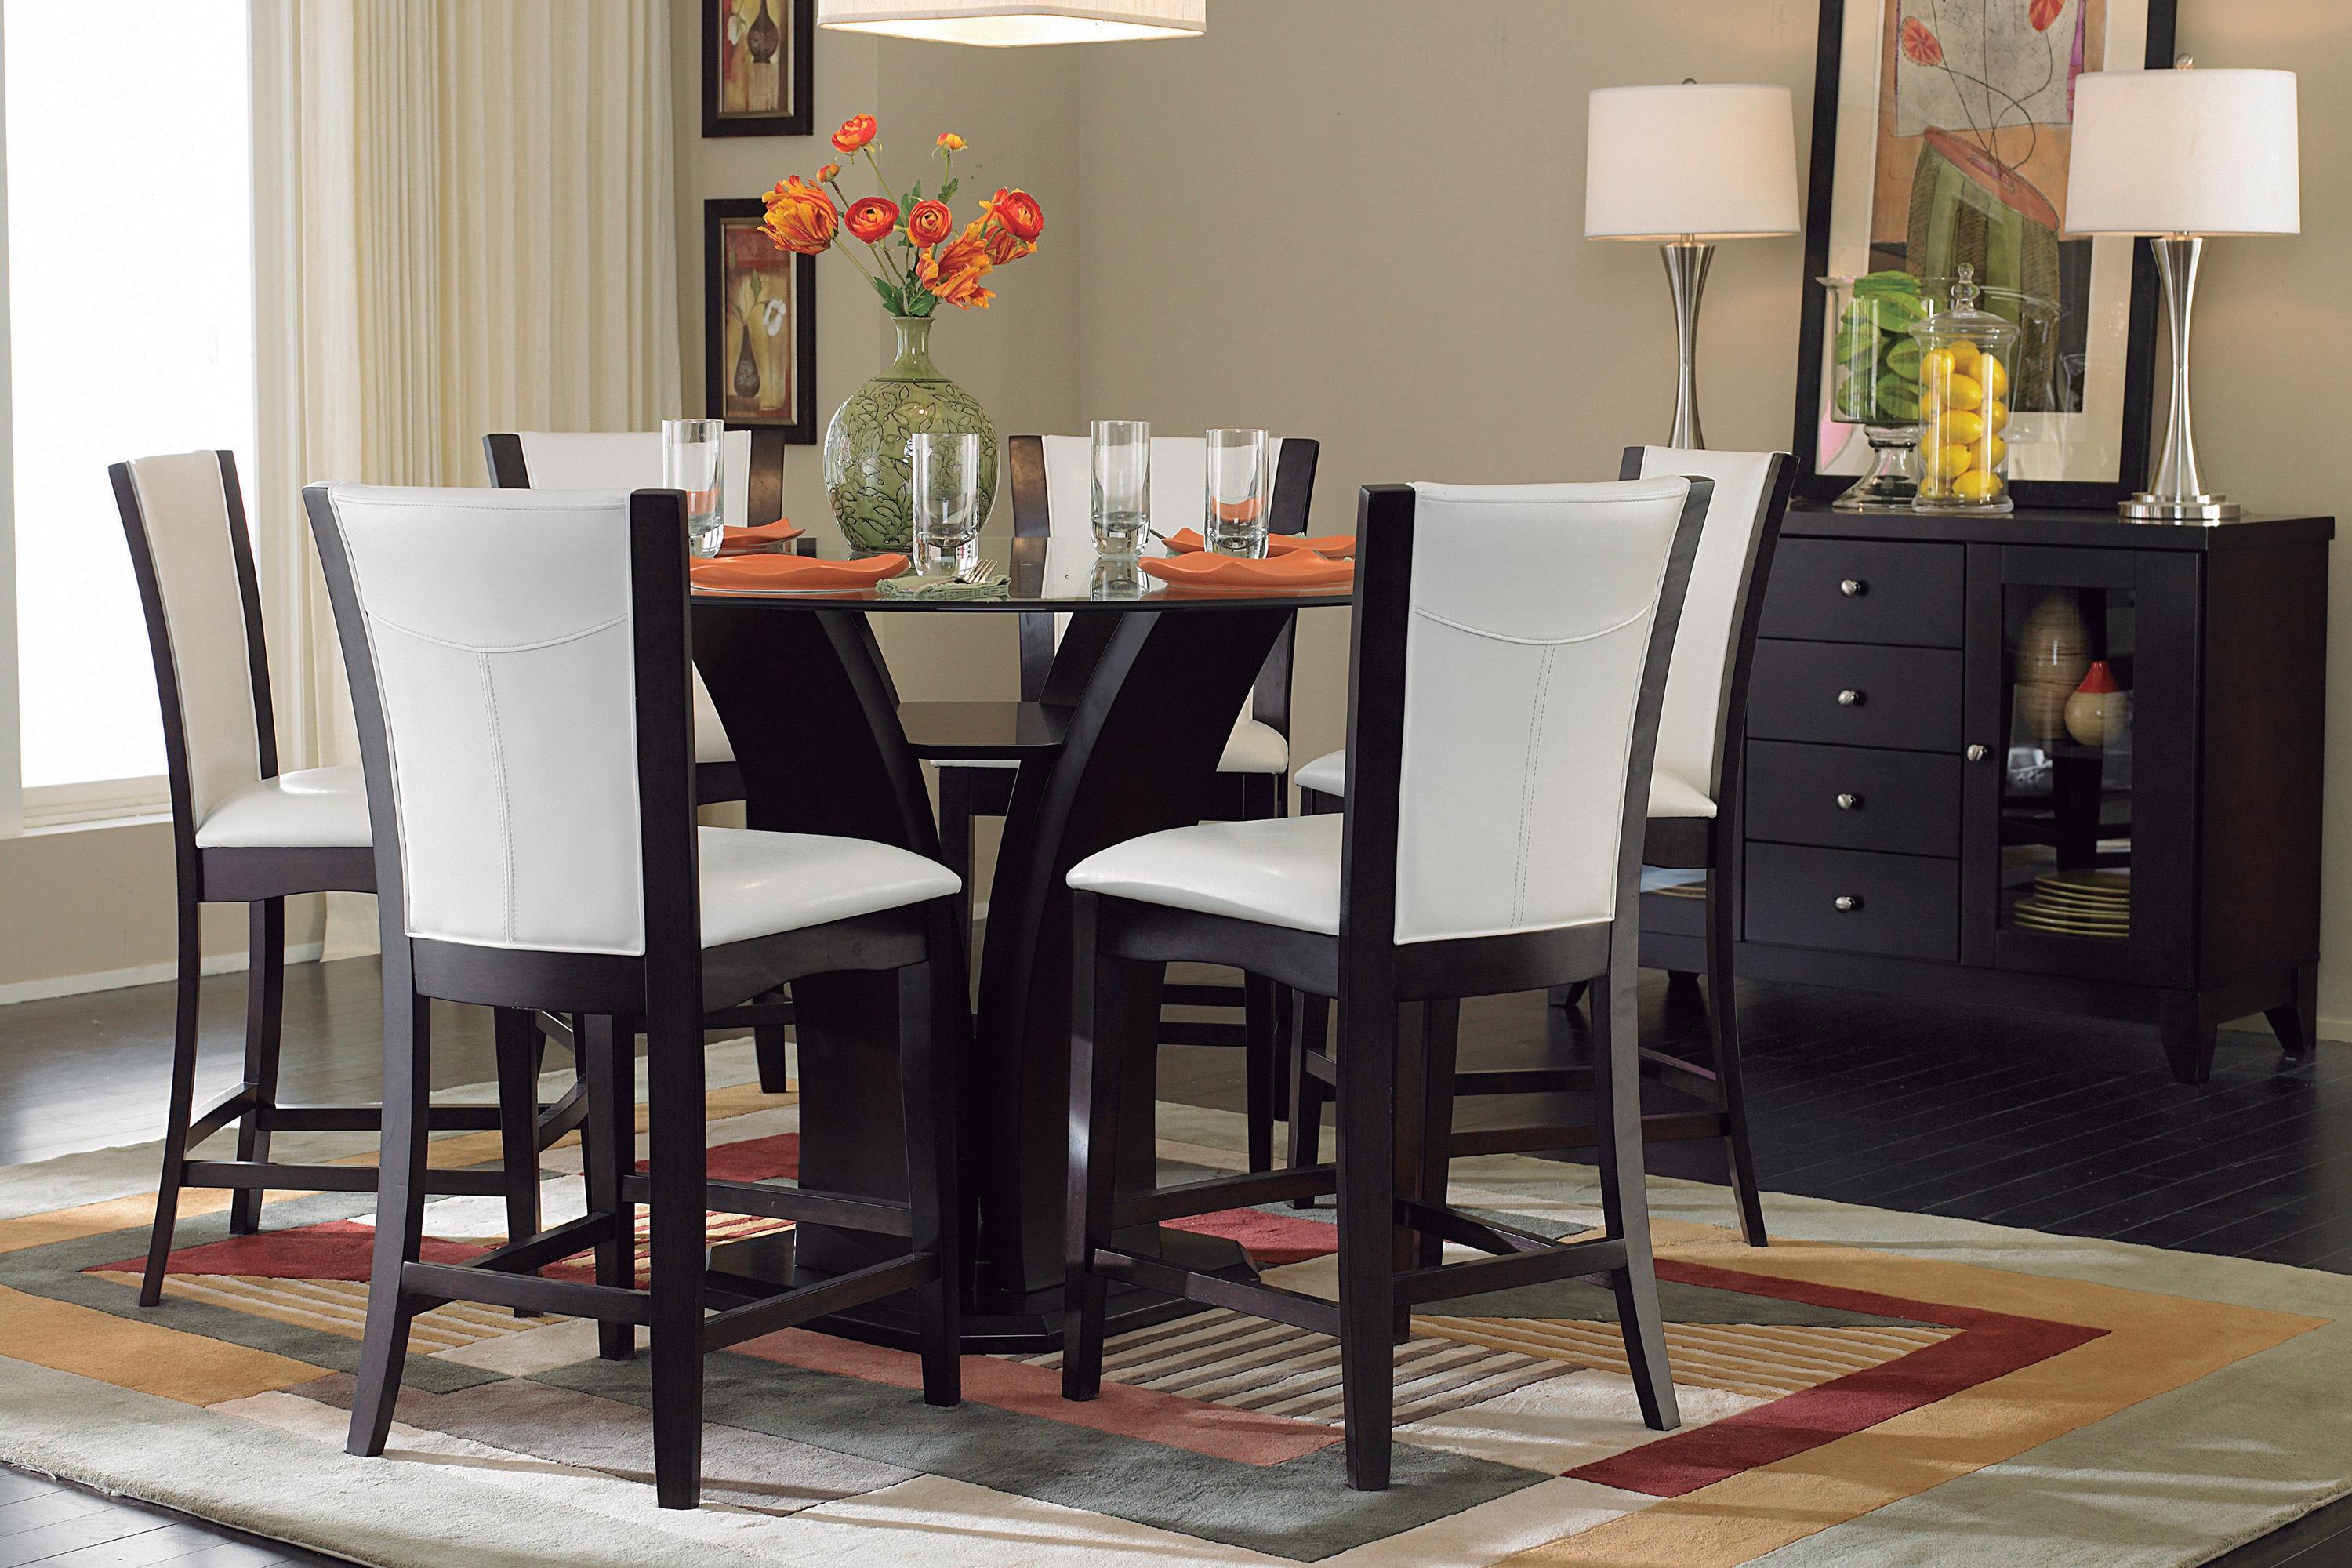 Contemporary Dining Room Set 710-36RD-W-5PC Daisy 710-36RD-W-5PC in Espresso, White Faux Leather